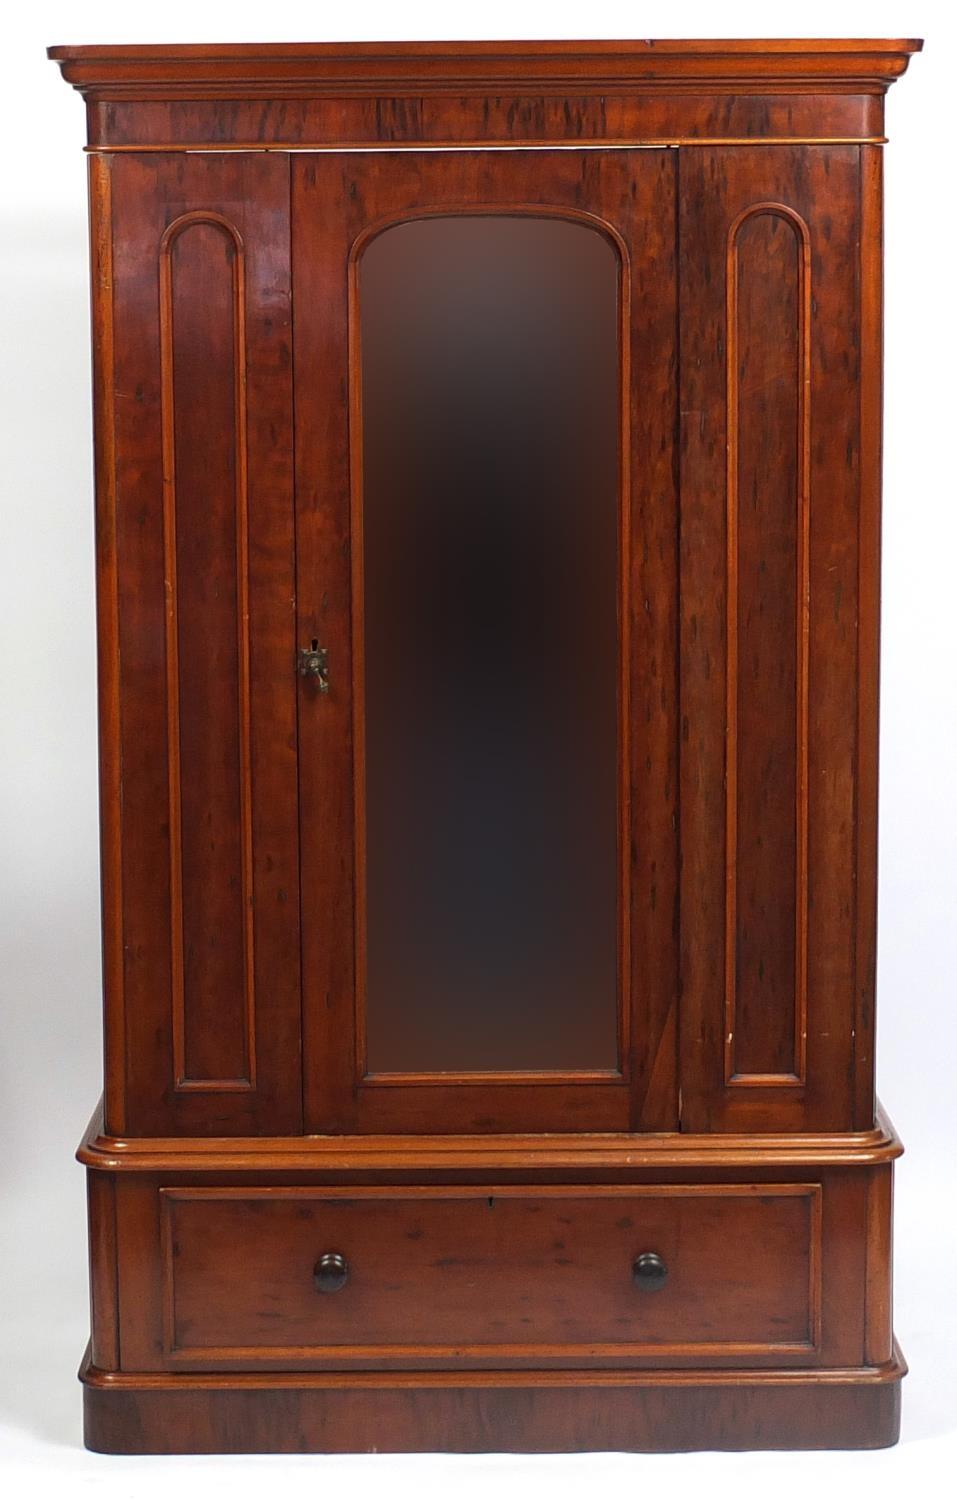 Victorian mahogany wardrobe with centre mirrored door and base drawer, 198cm H x 120cm W x 52cm